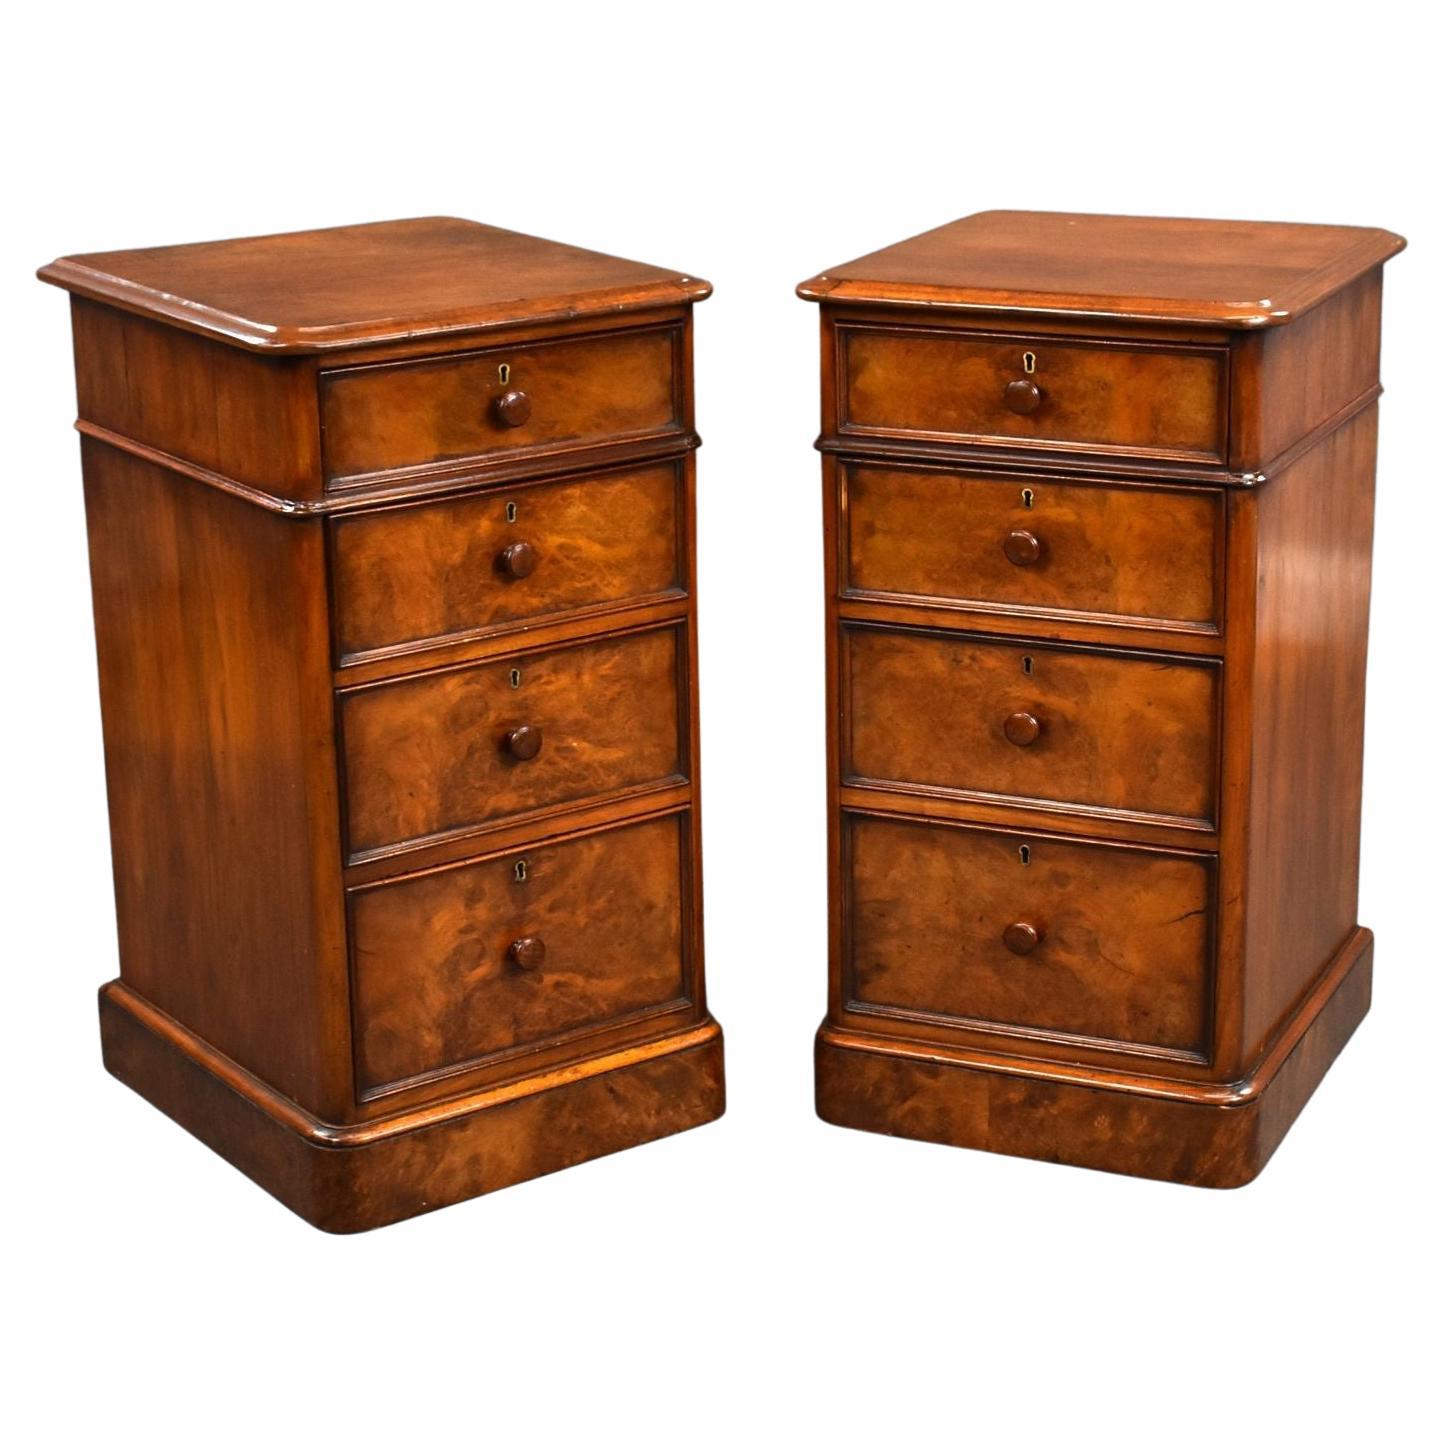 Pair of Victorian Figured Walnut Bedside Chests